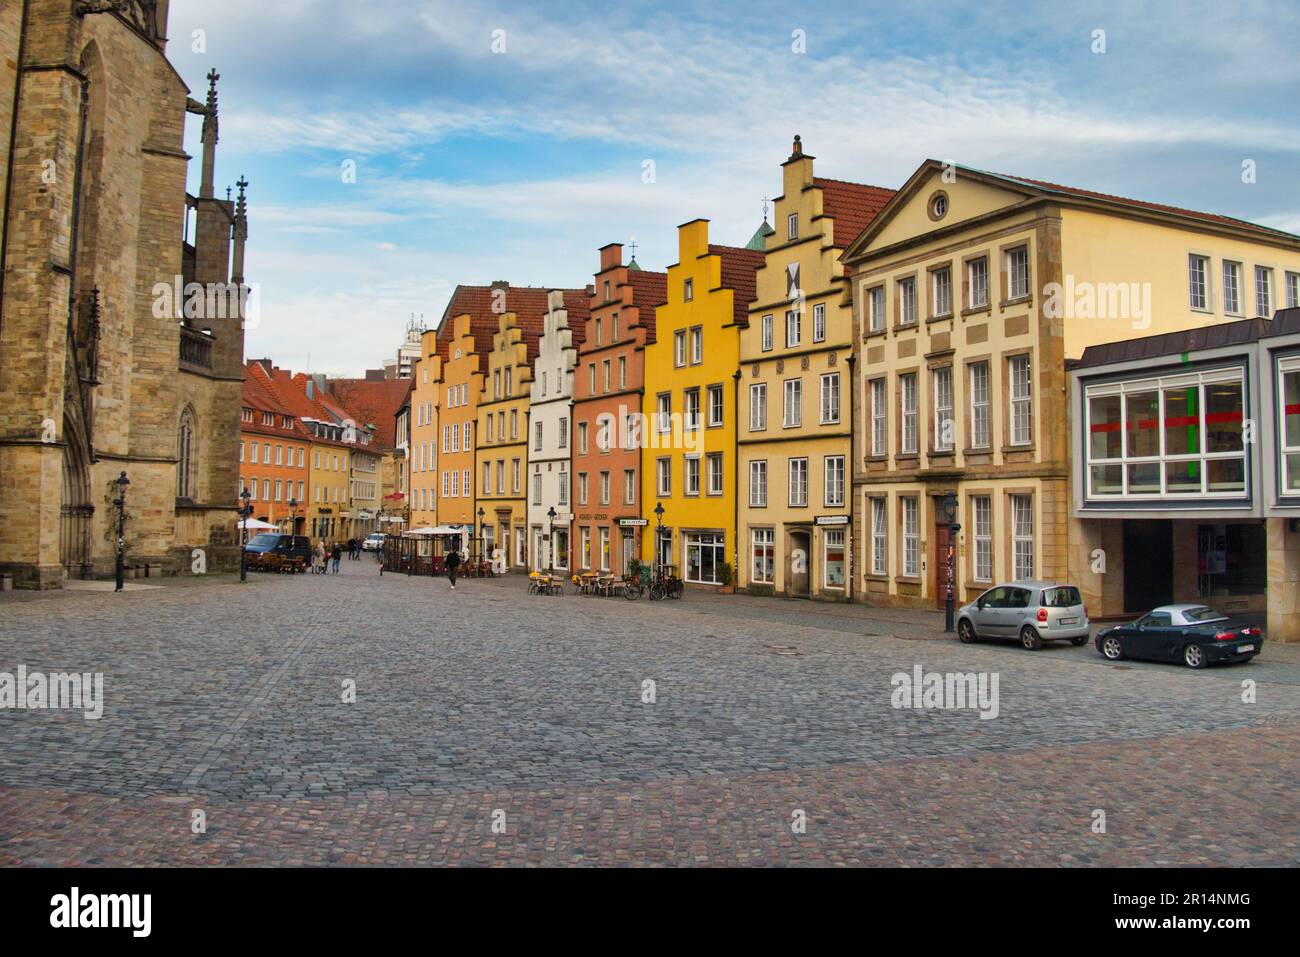 Market square of the city of Osnabrück, photographed from the town hall Stock Photo